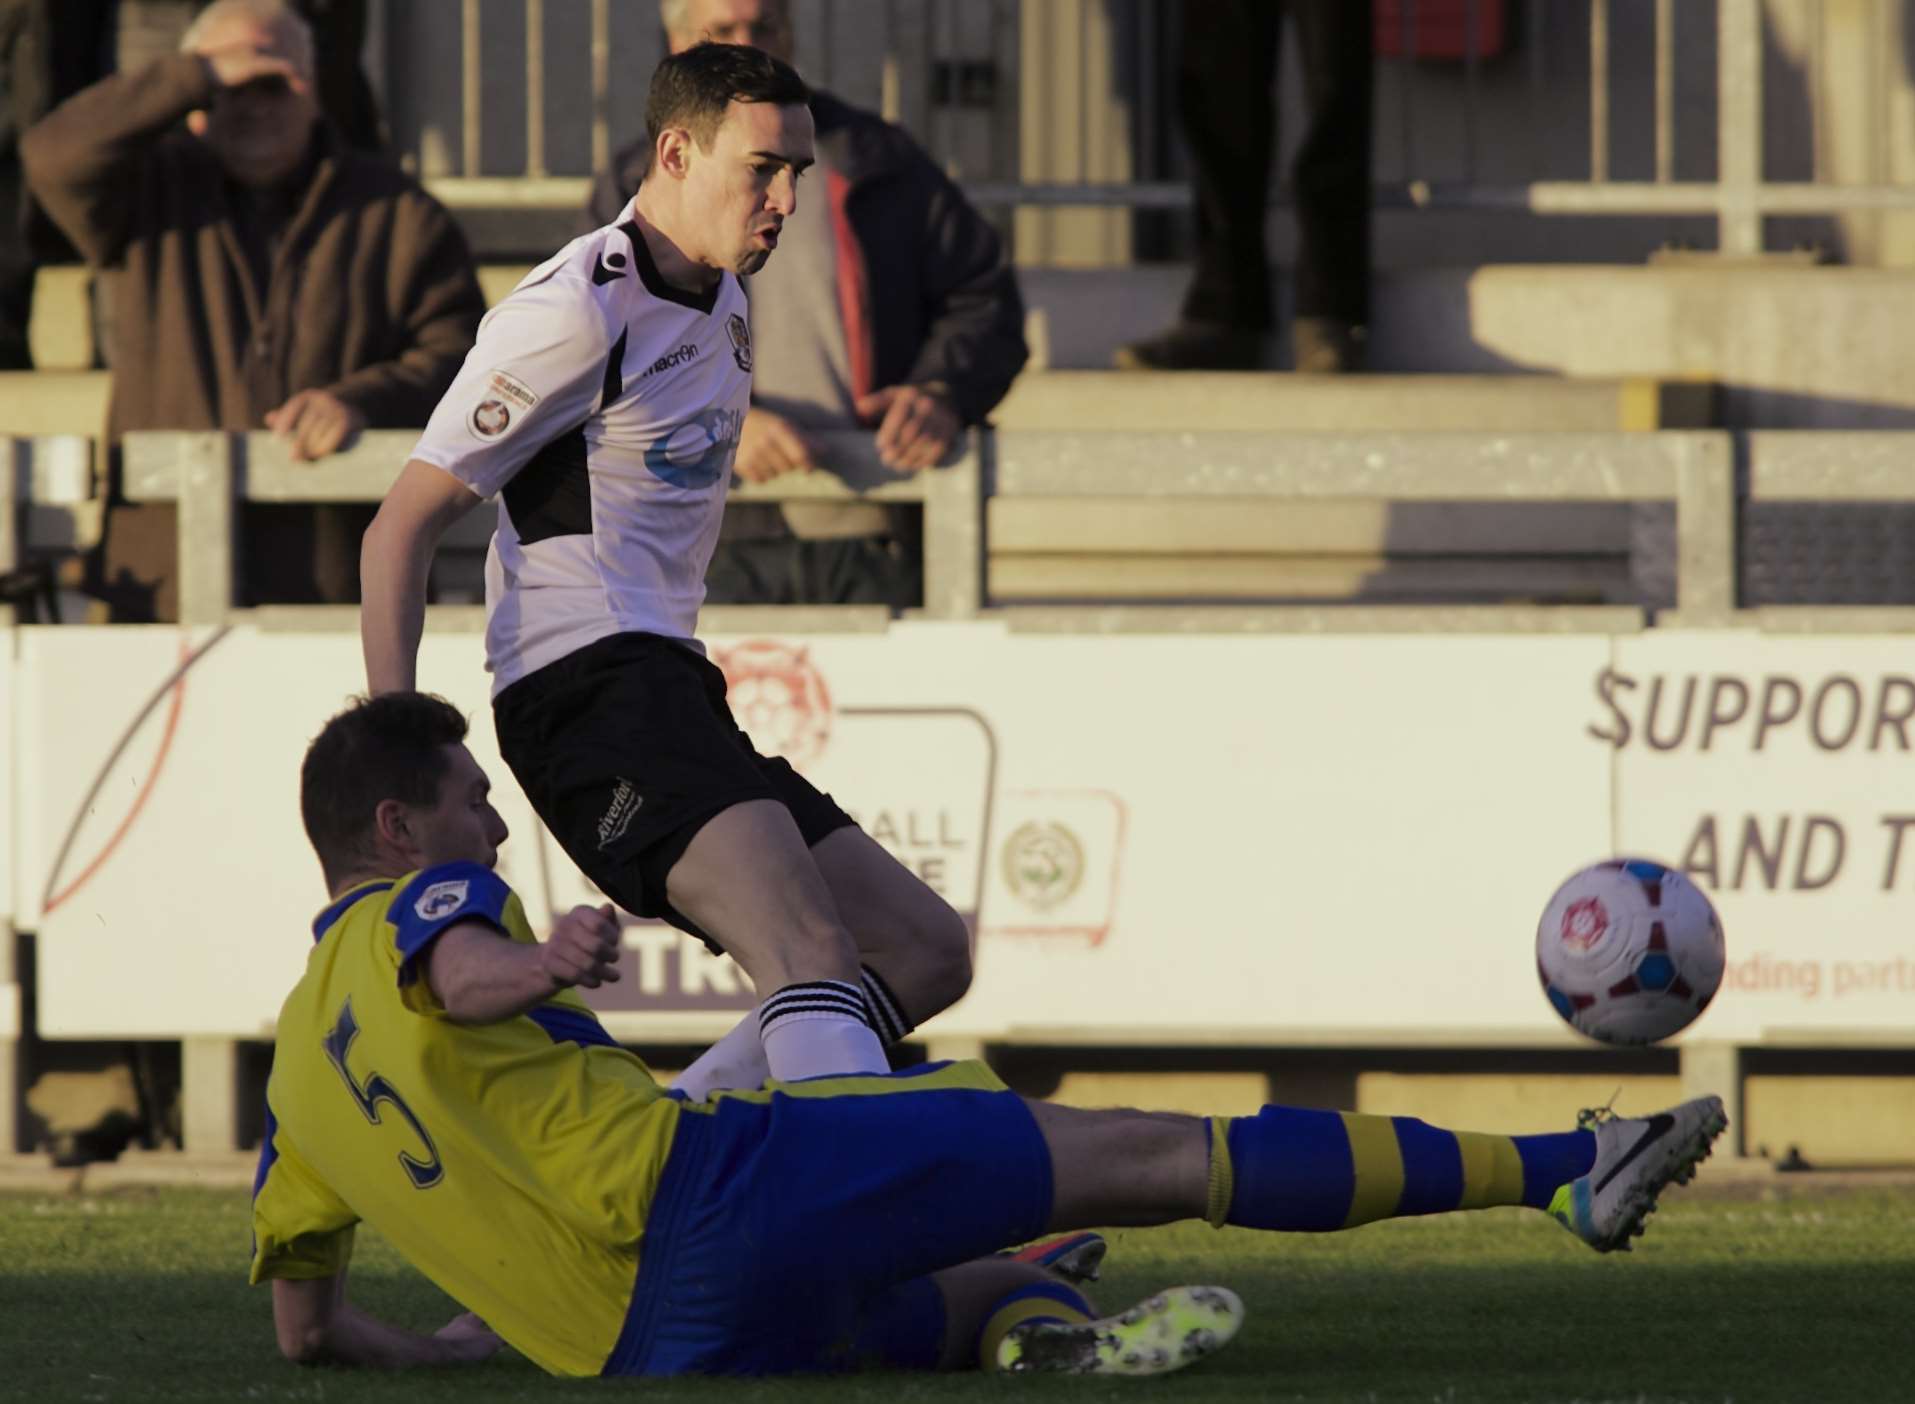 Dartford's Danny Harris is challenged by Solihull Moors' Liam Daly. Picture: Andy Payton